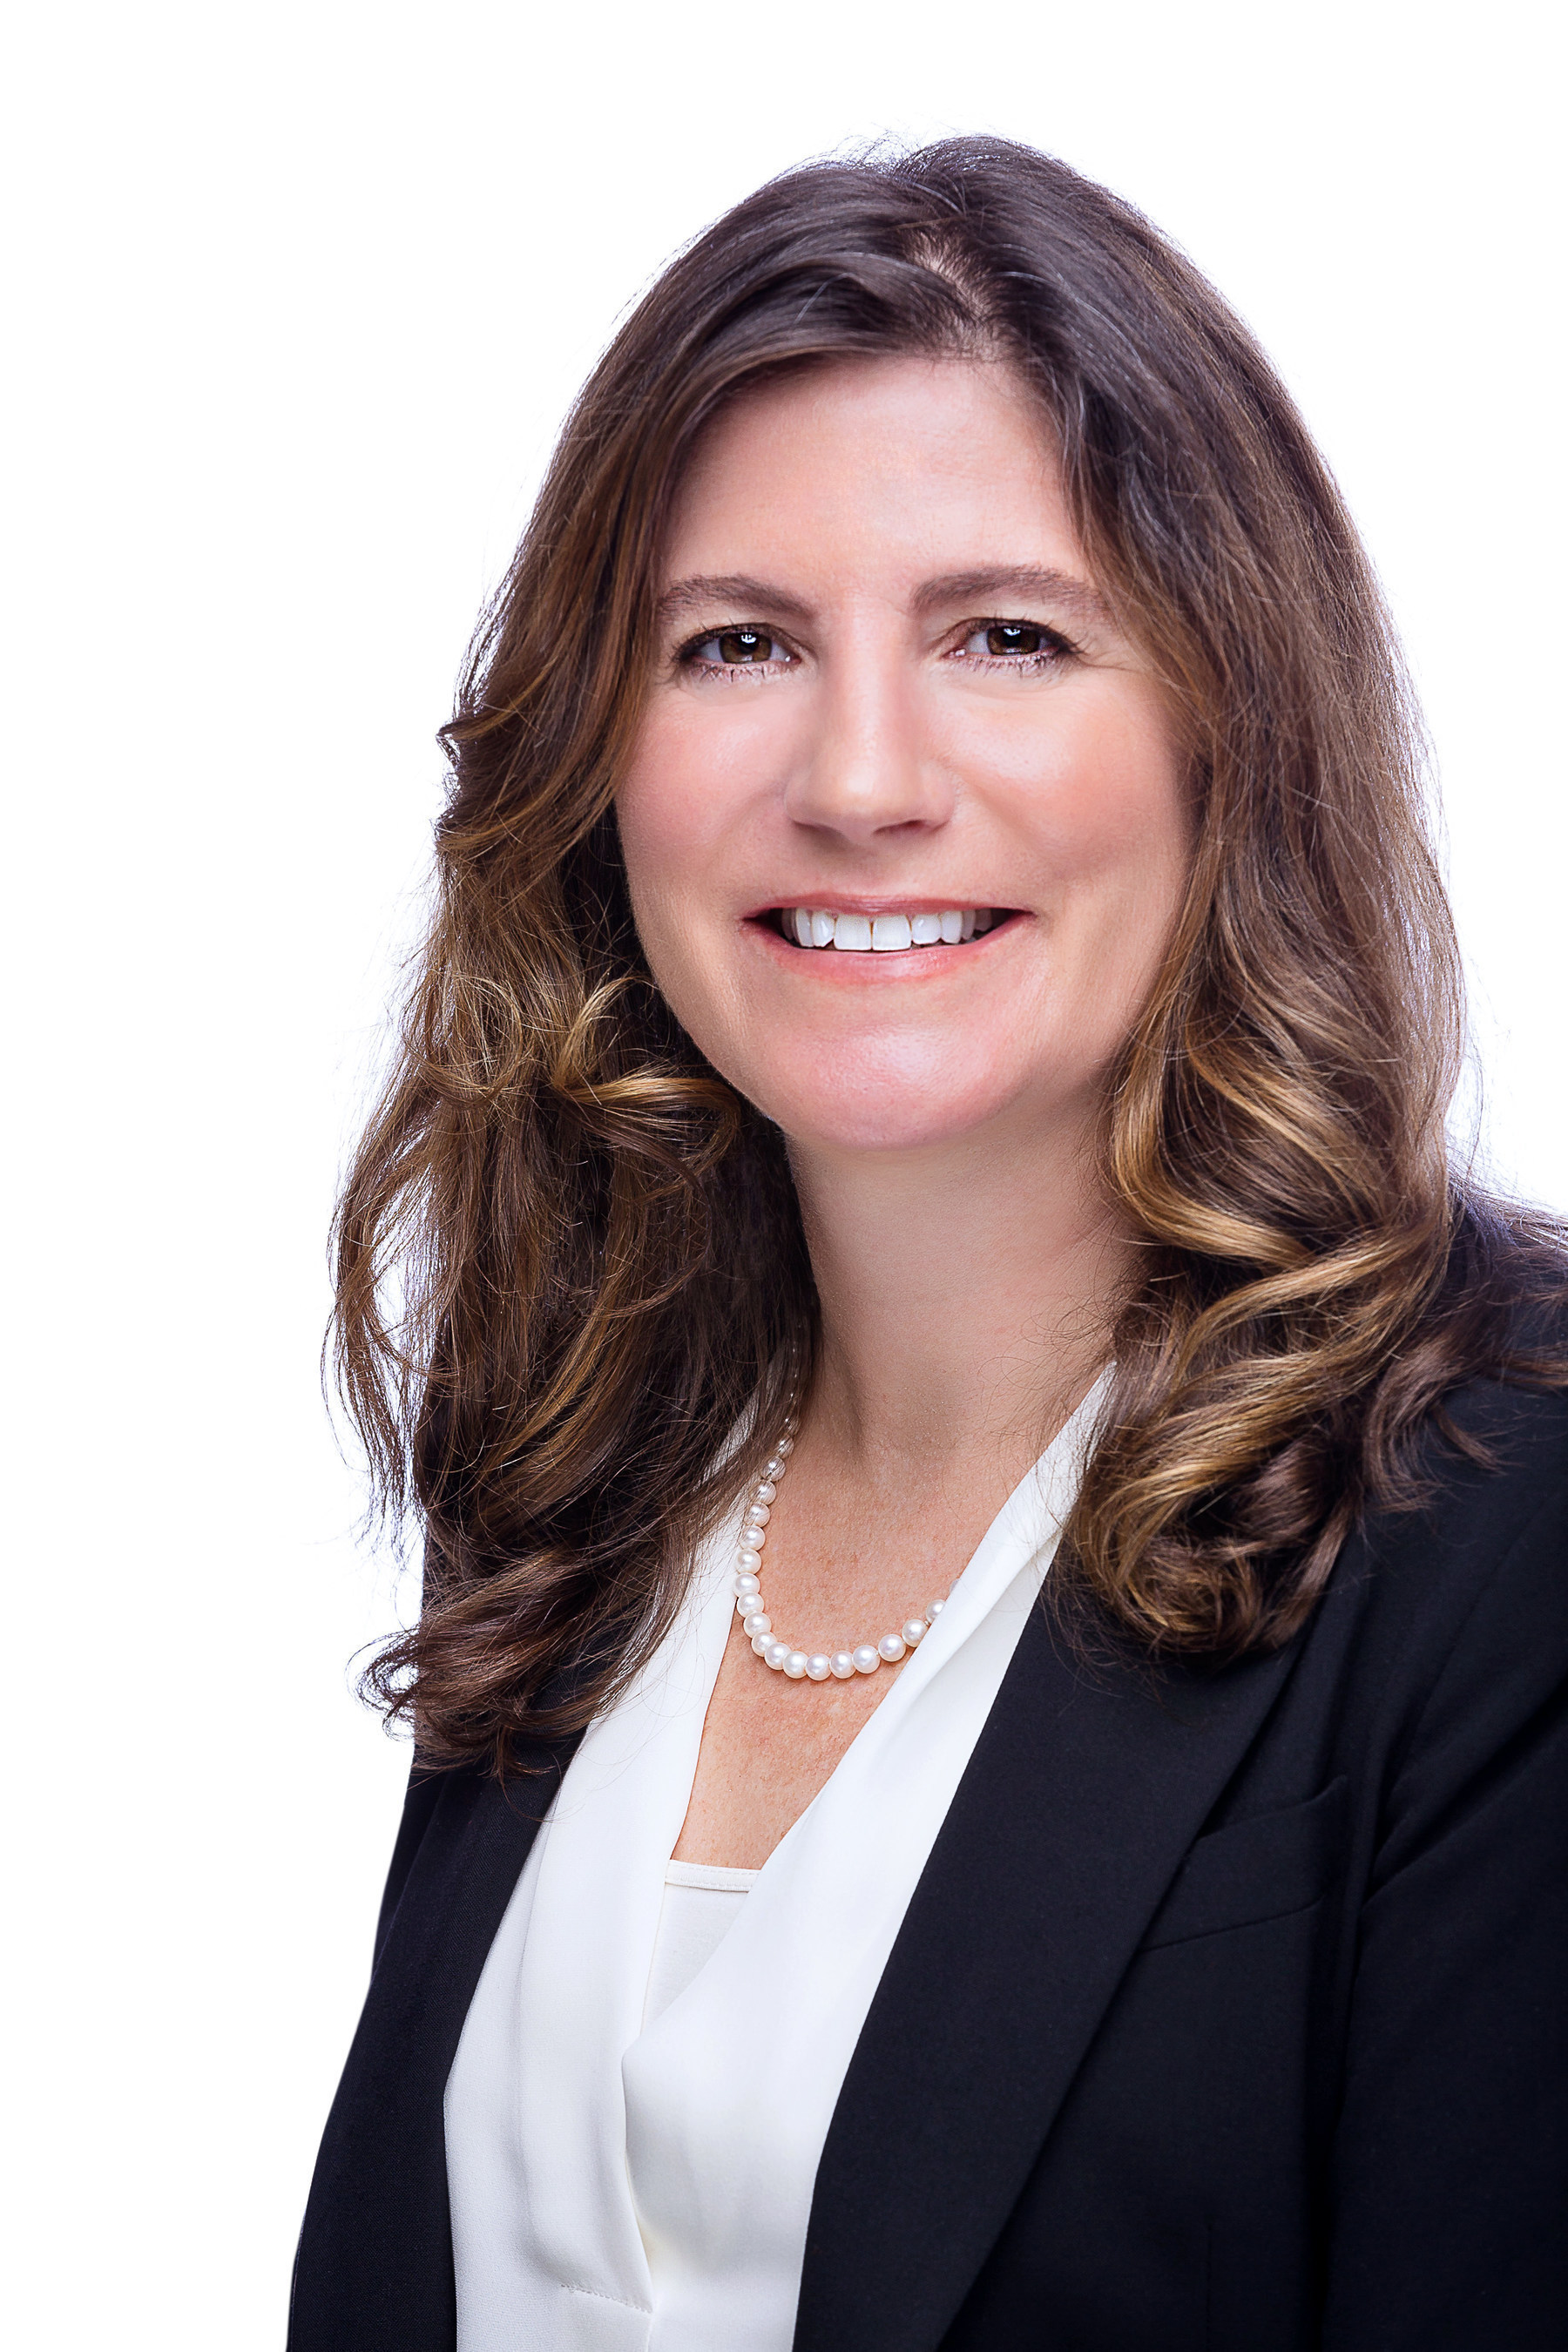 Ann Holder joins ImpediMed as the Senior Vice President of General Management and Operations.